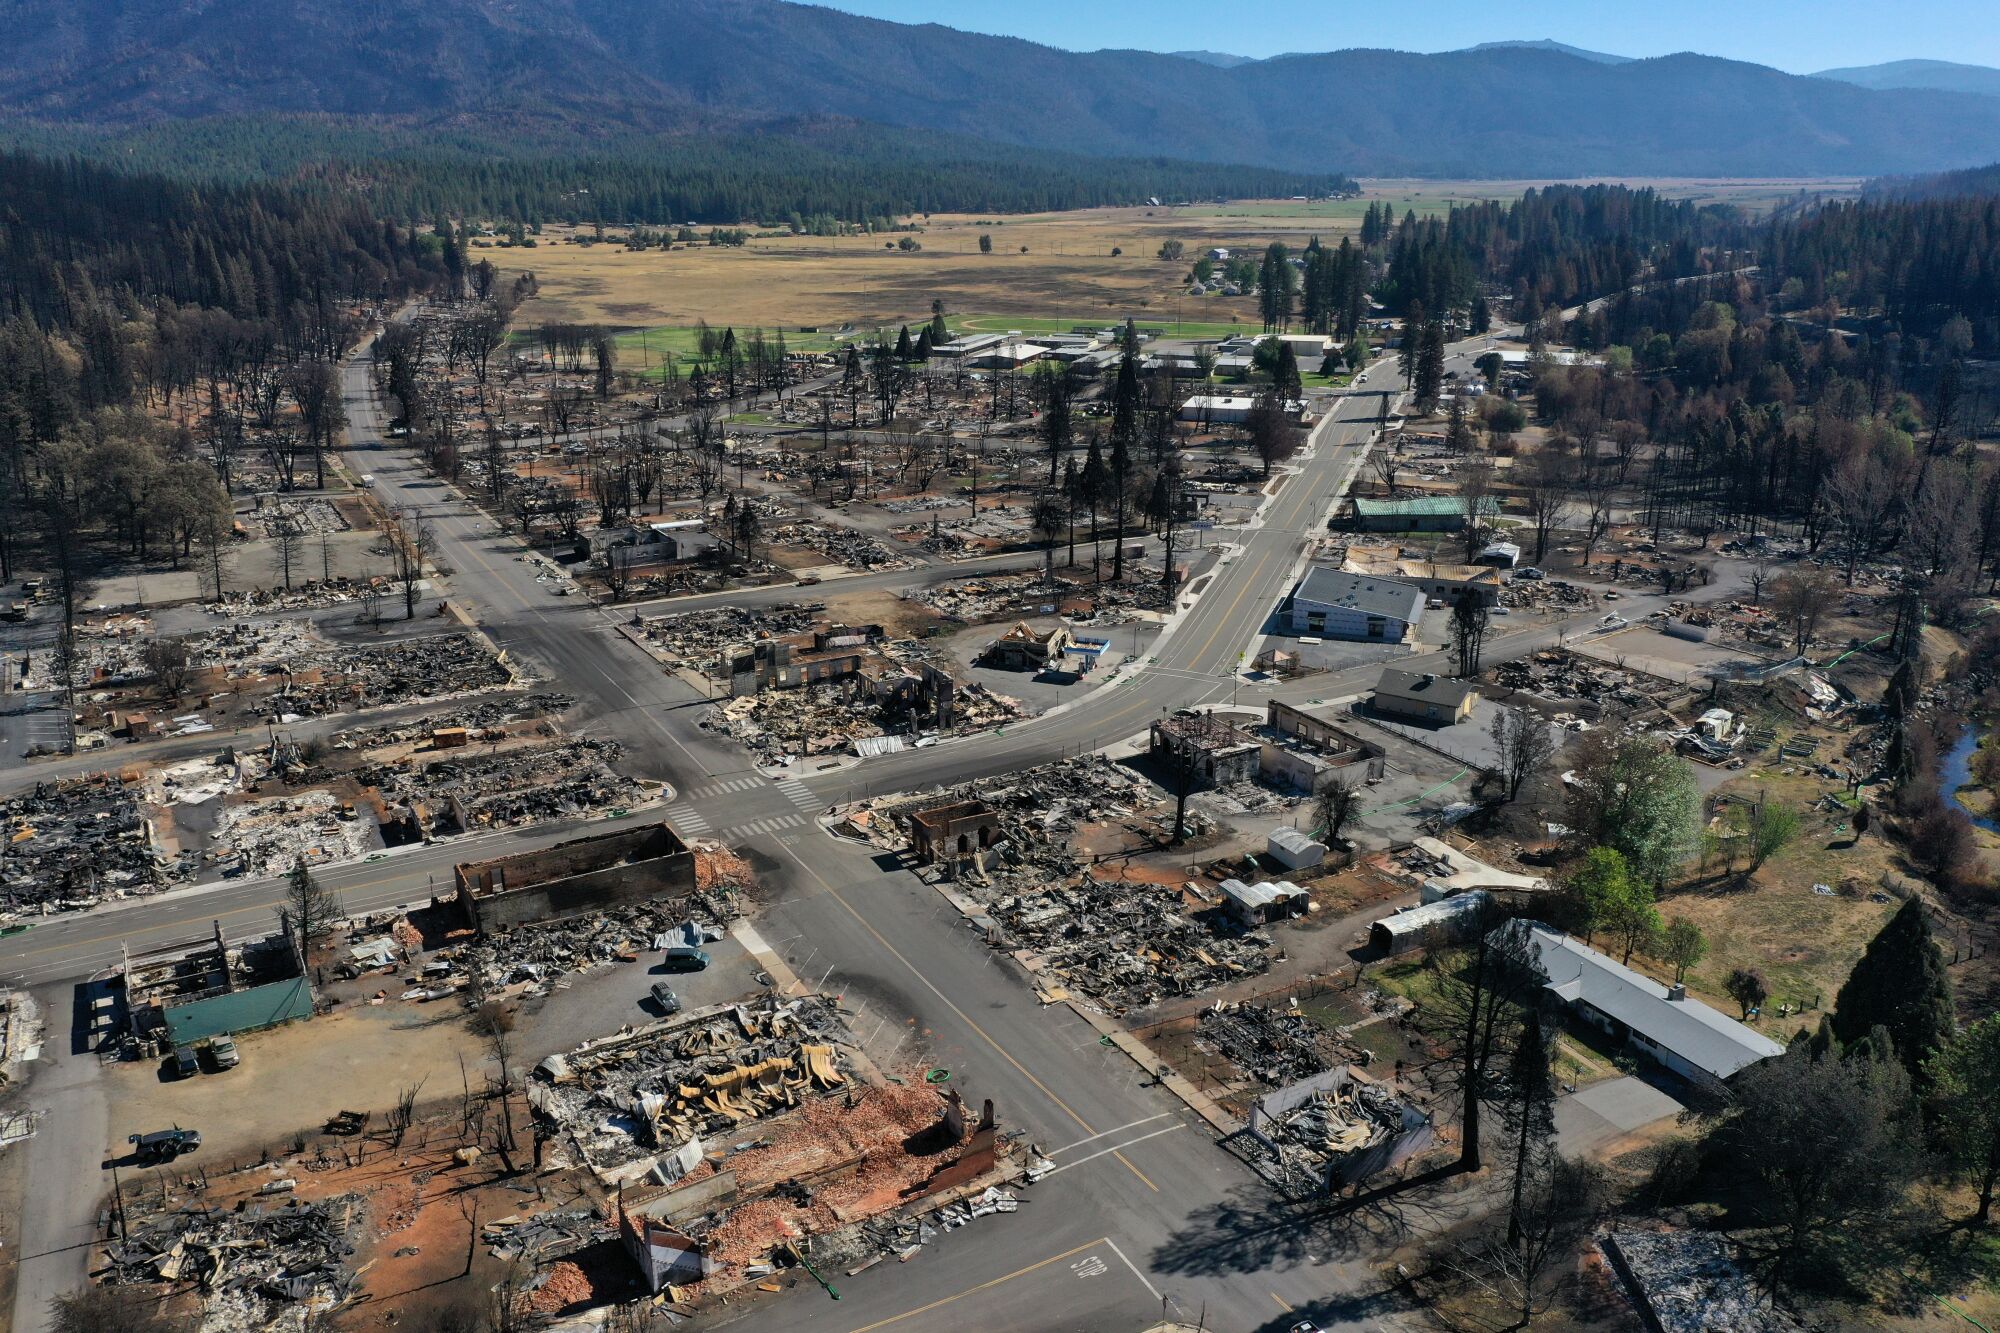 The remains of a neighborhood destroyed by fire